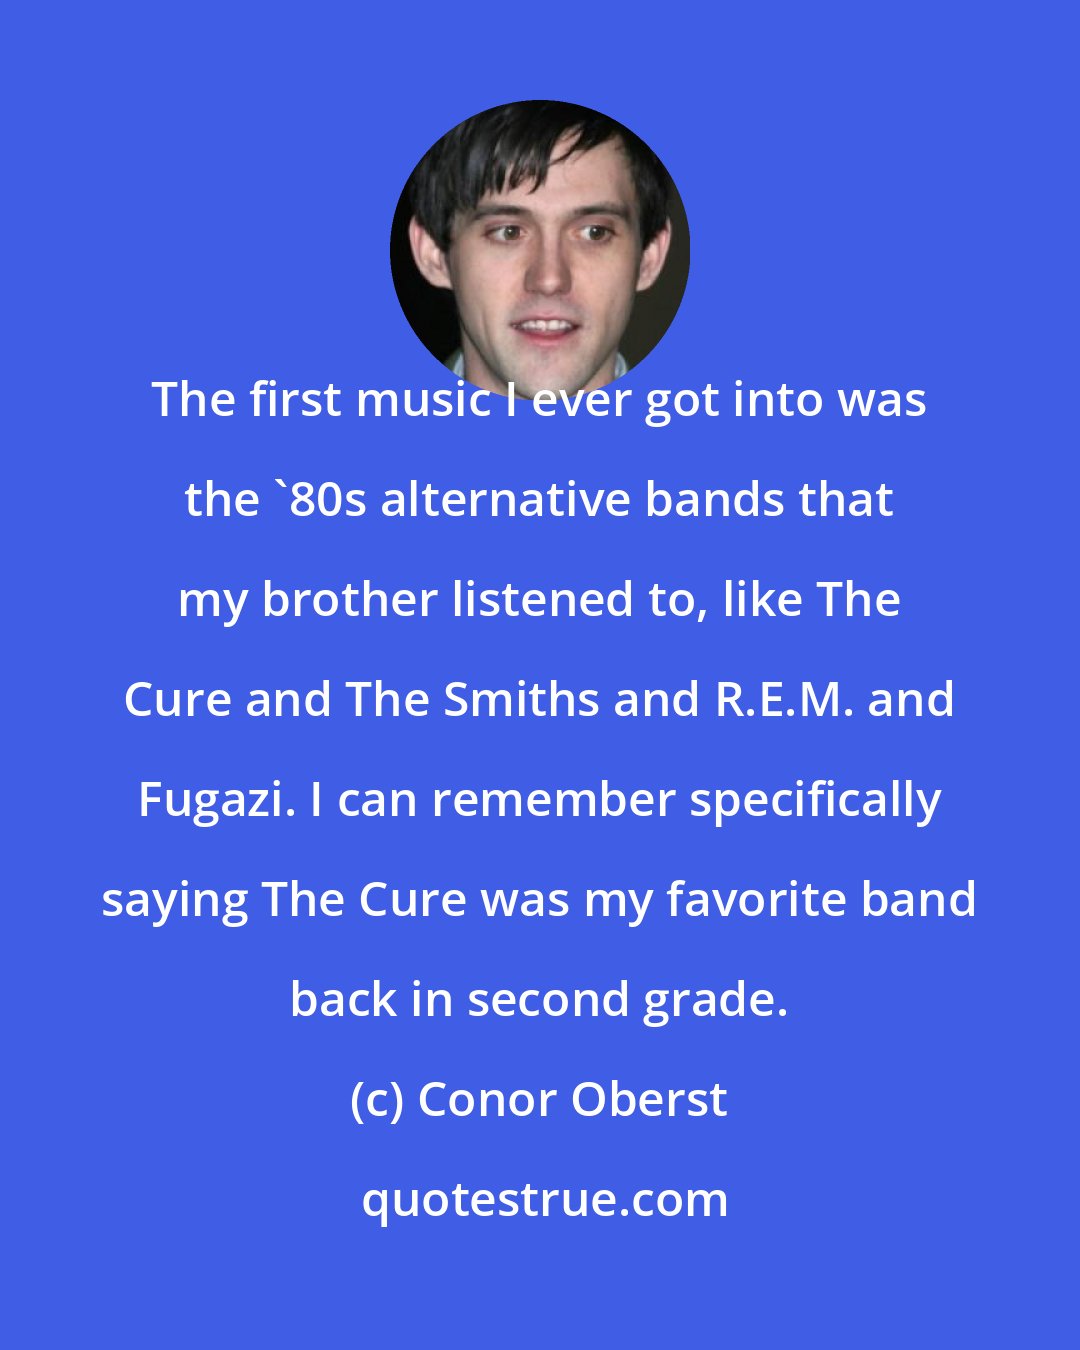 Conor Oberst: The first music I ever got into was the '80s alternative bands that my brother listened to, like The Cure and The Smiths and R.E.M. and Fugazi. I can remember specifically saying The Cure was my favorite band back in second grade.